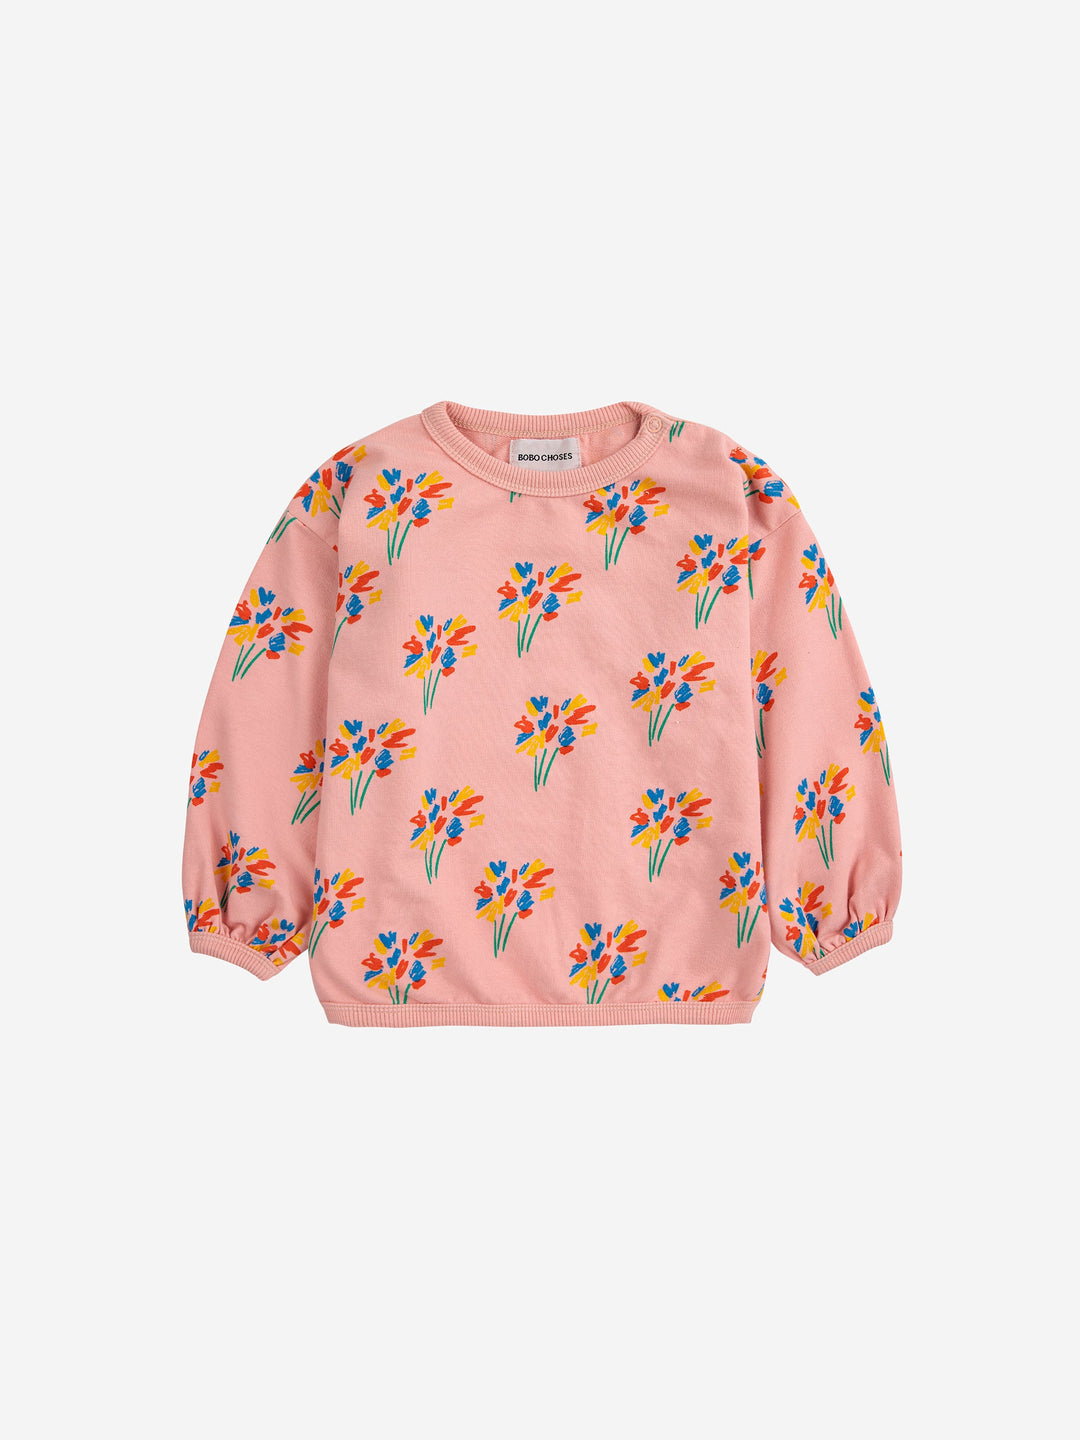 Sweater Baby Fireworks All Over Pink